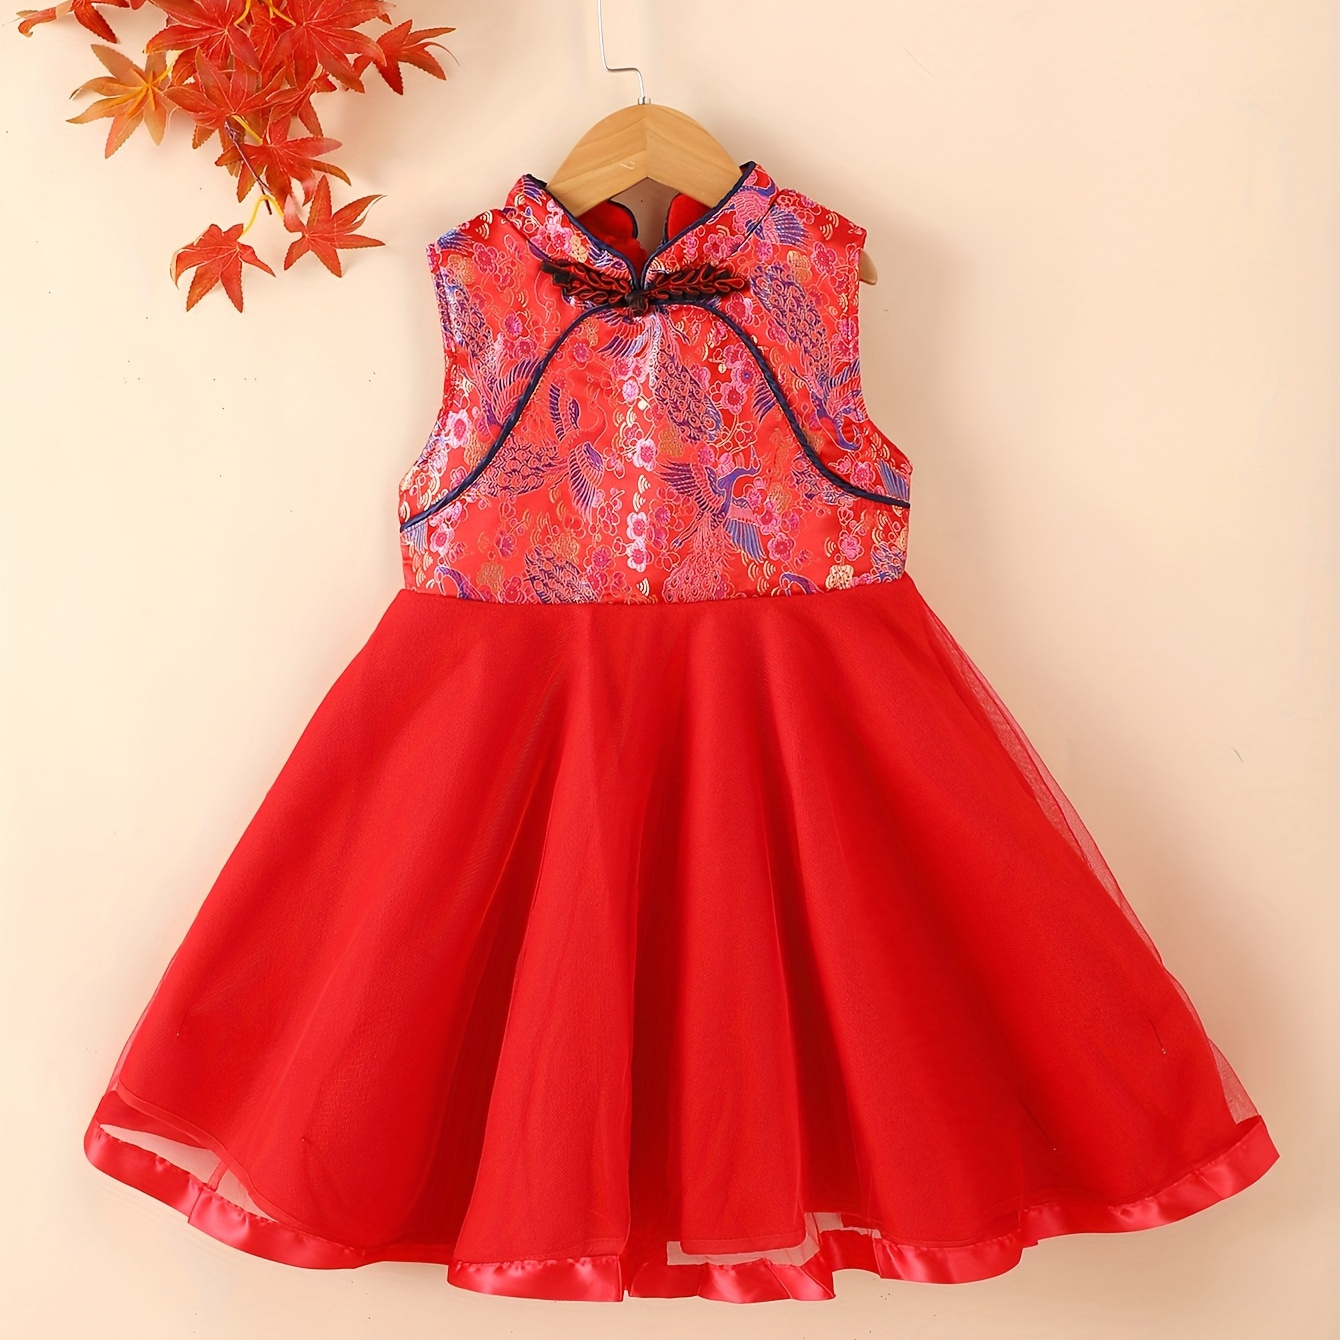 

Chinese Vintage Style Hanfu, Embroidery Sleeveless Tutu Dress Kids Clothes For Girls New Year Party Gift